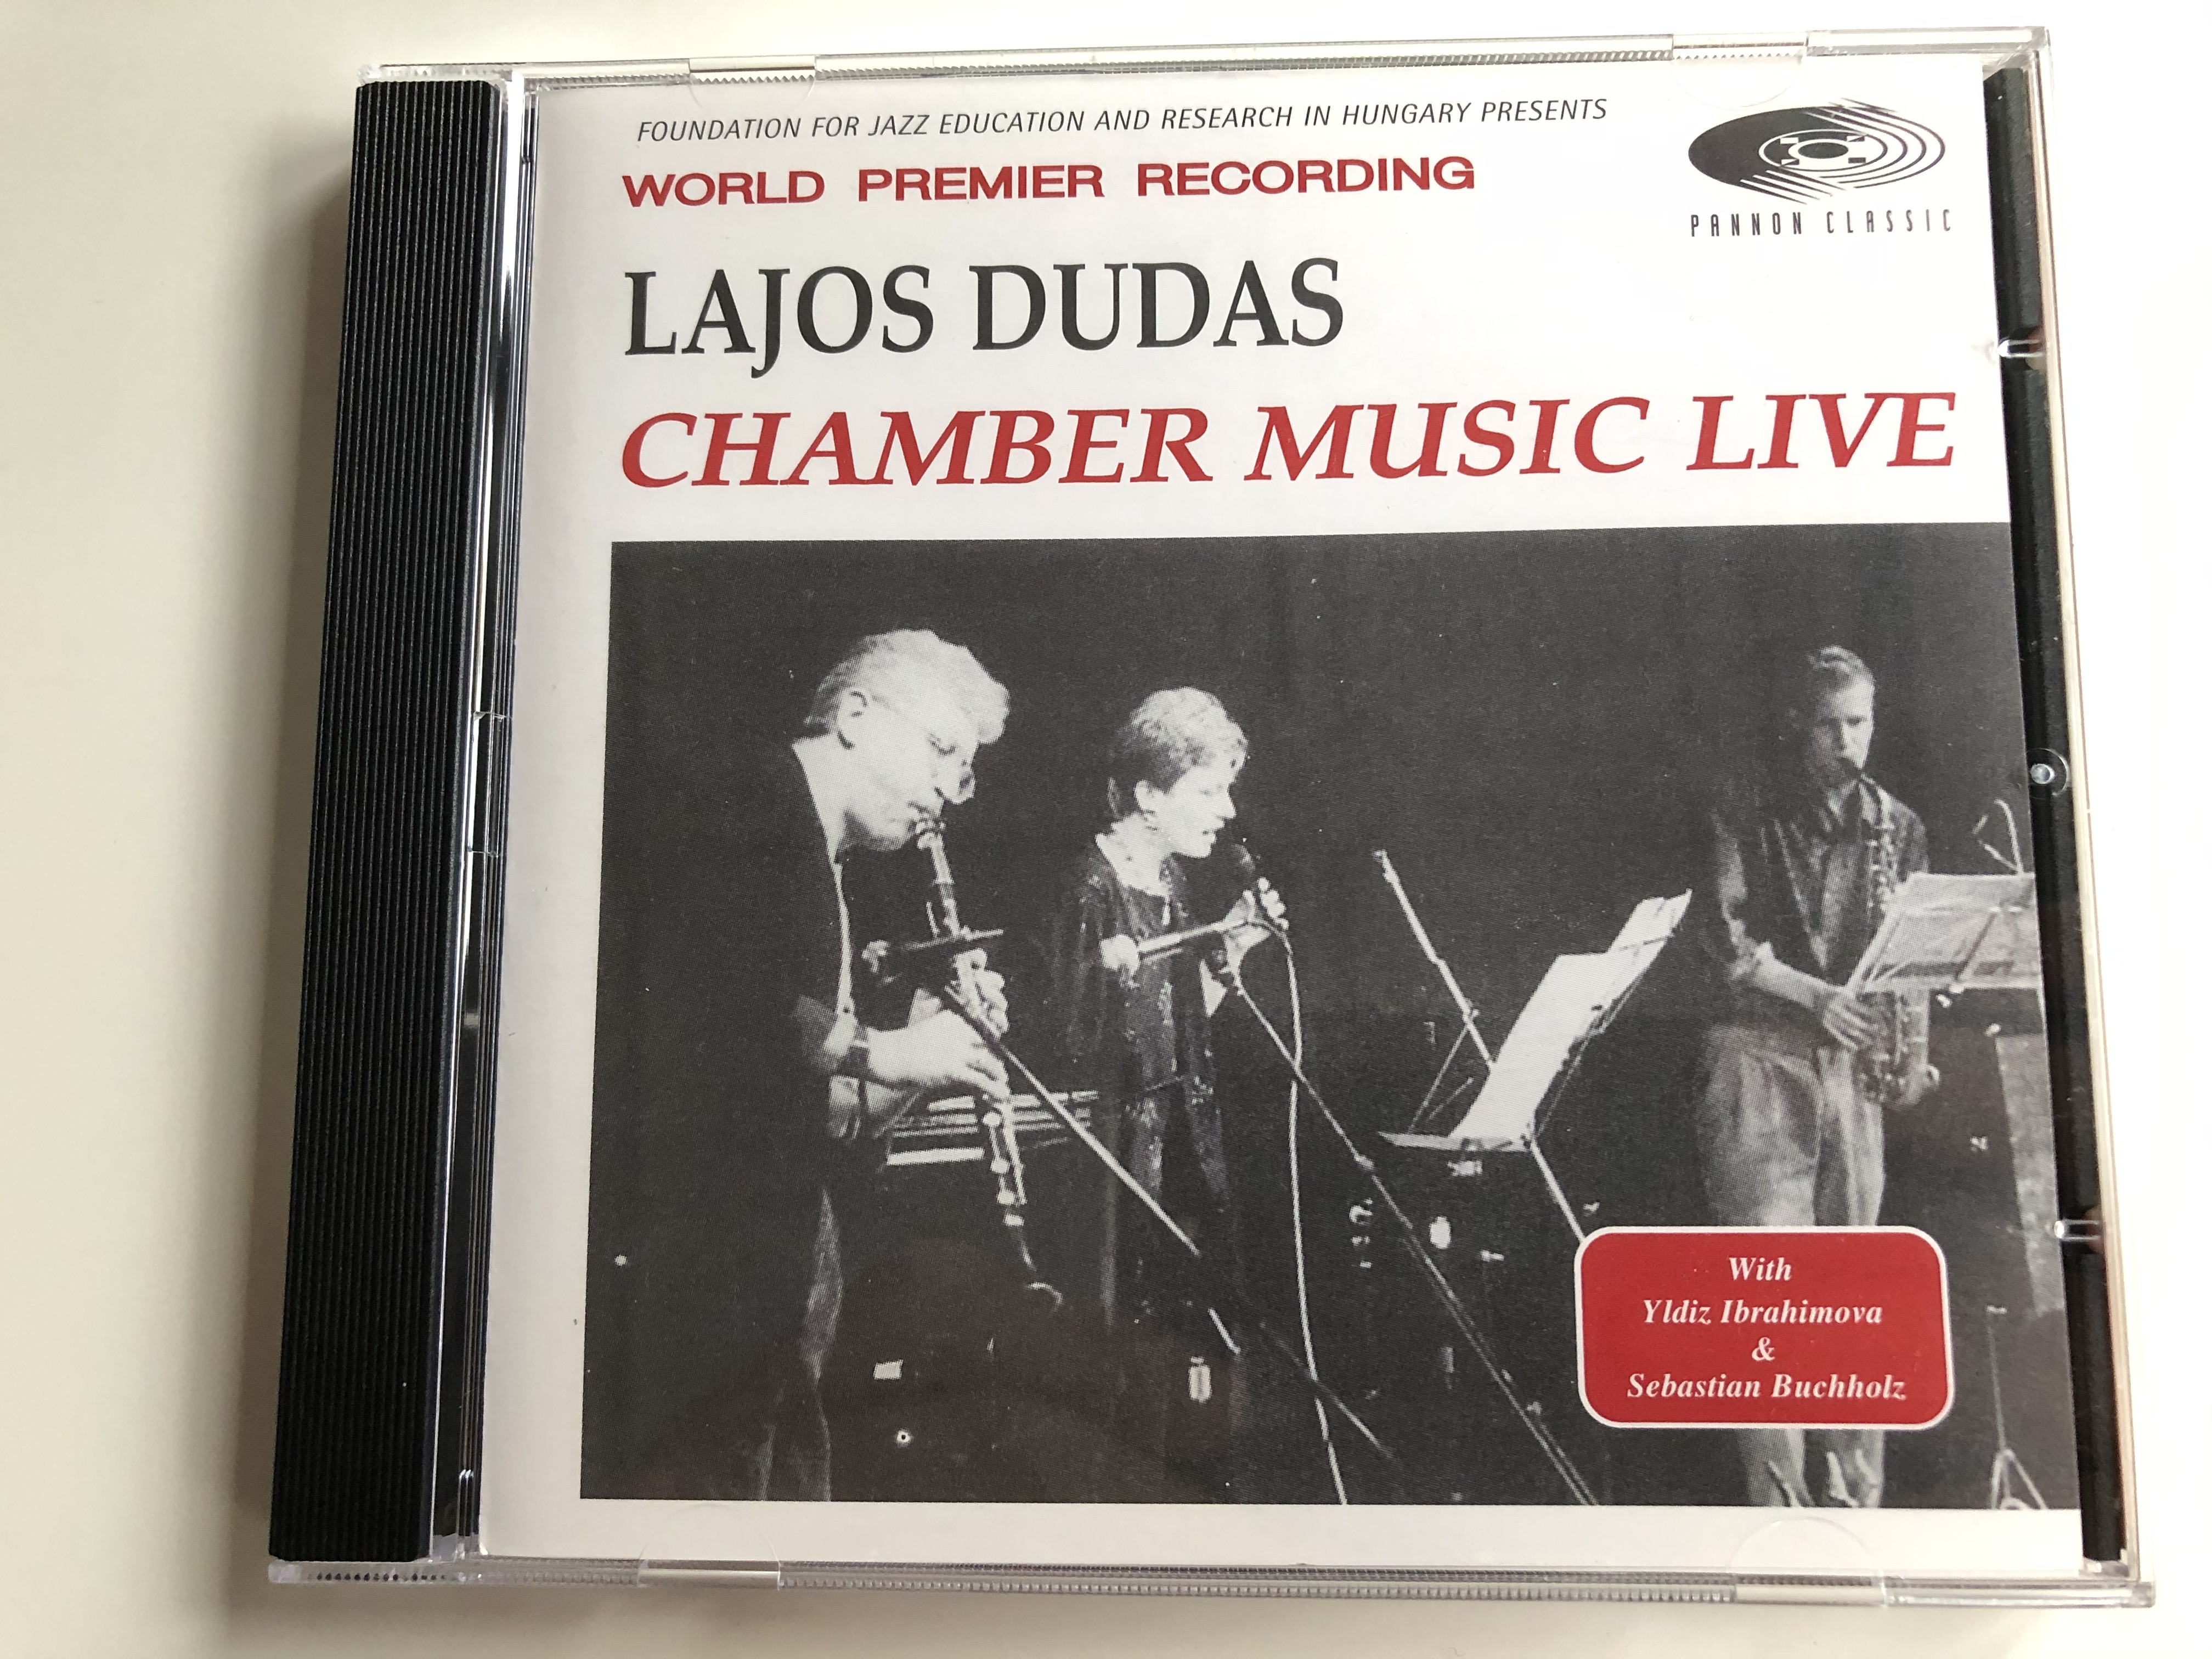 lajos-dudas-chamber-music-live-foundation-for-jazz-education-and-research-in-hungary-presents-world-premier-recording-pannon-classic-audio-cd-1997-pcl-8004-1-.jpg